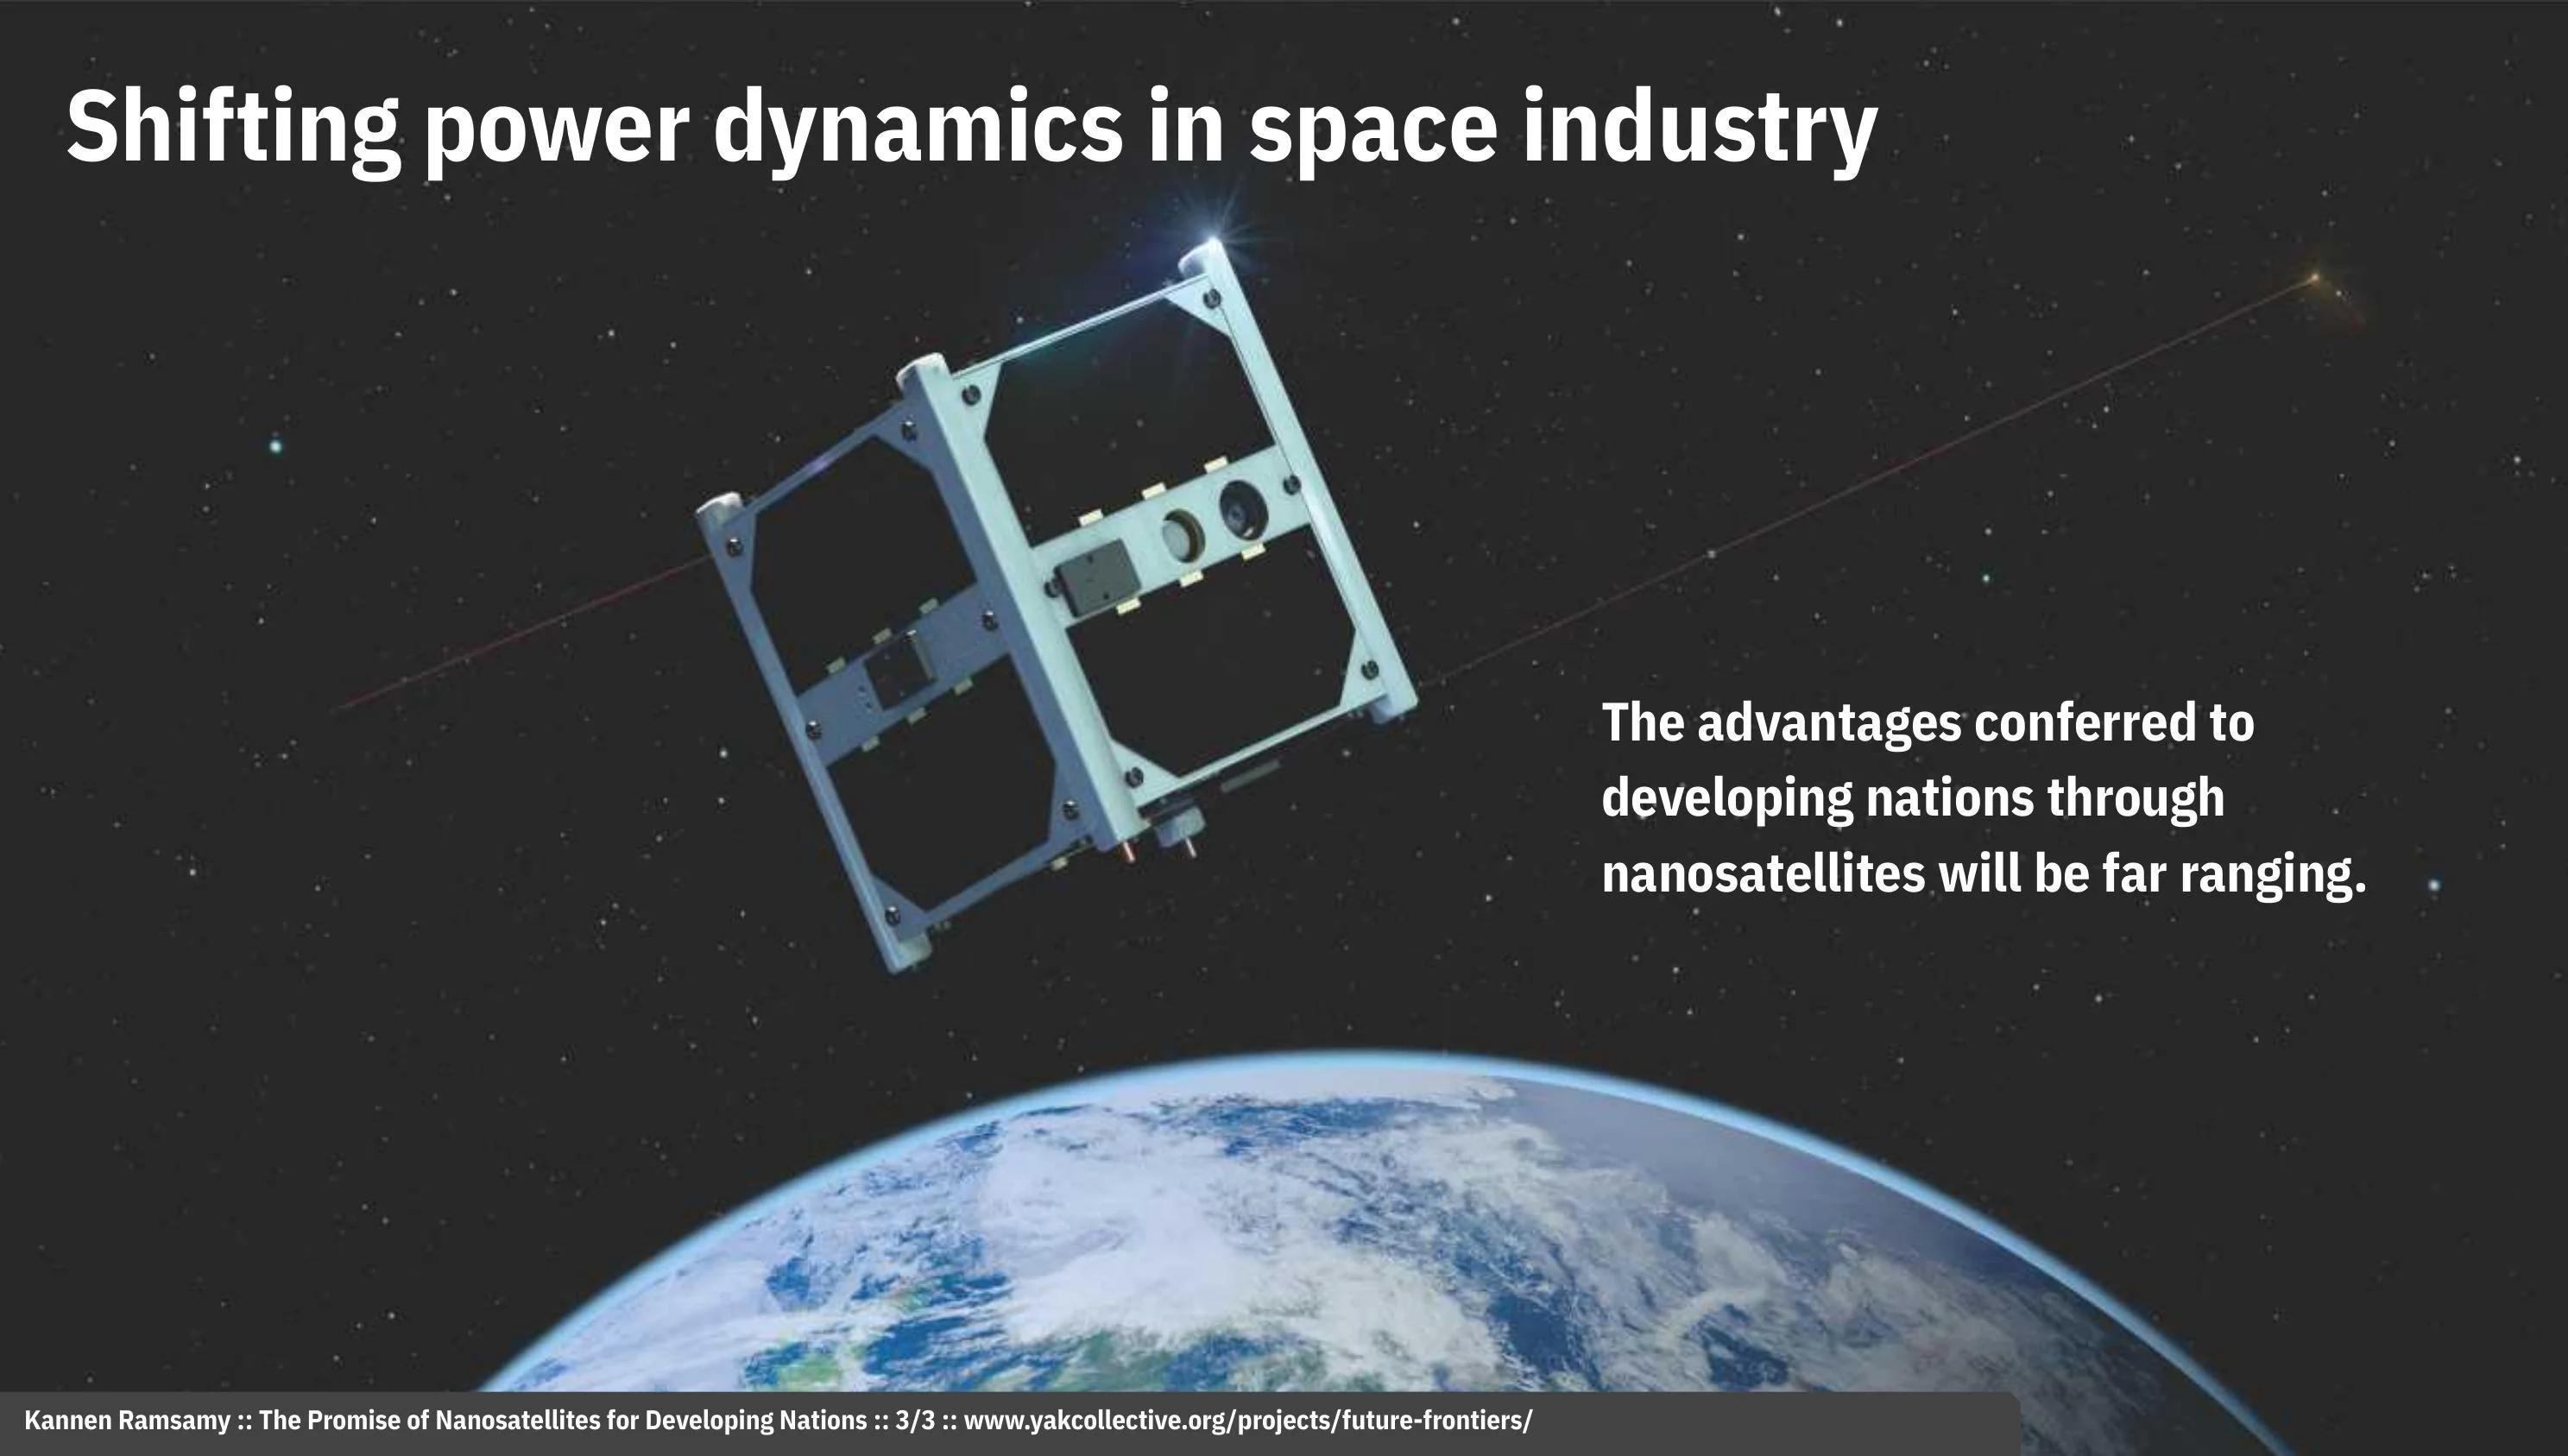 The promise of nanosatellites for developing nations